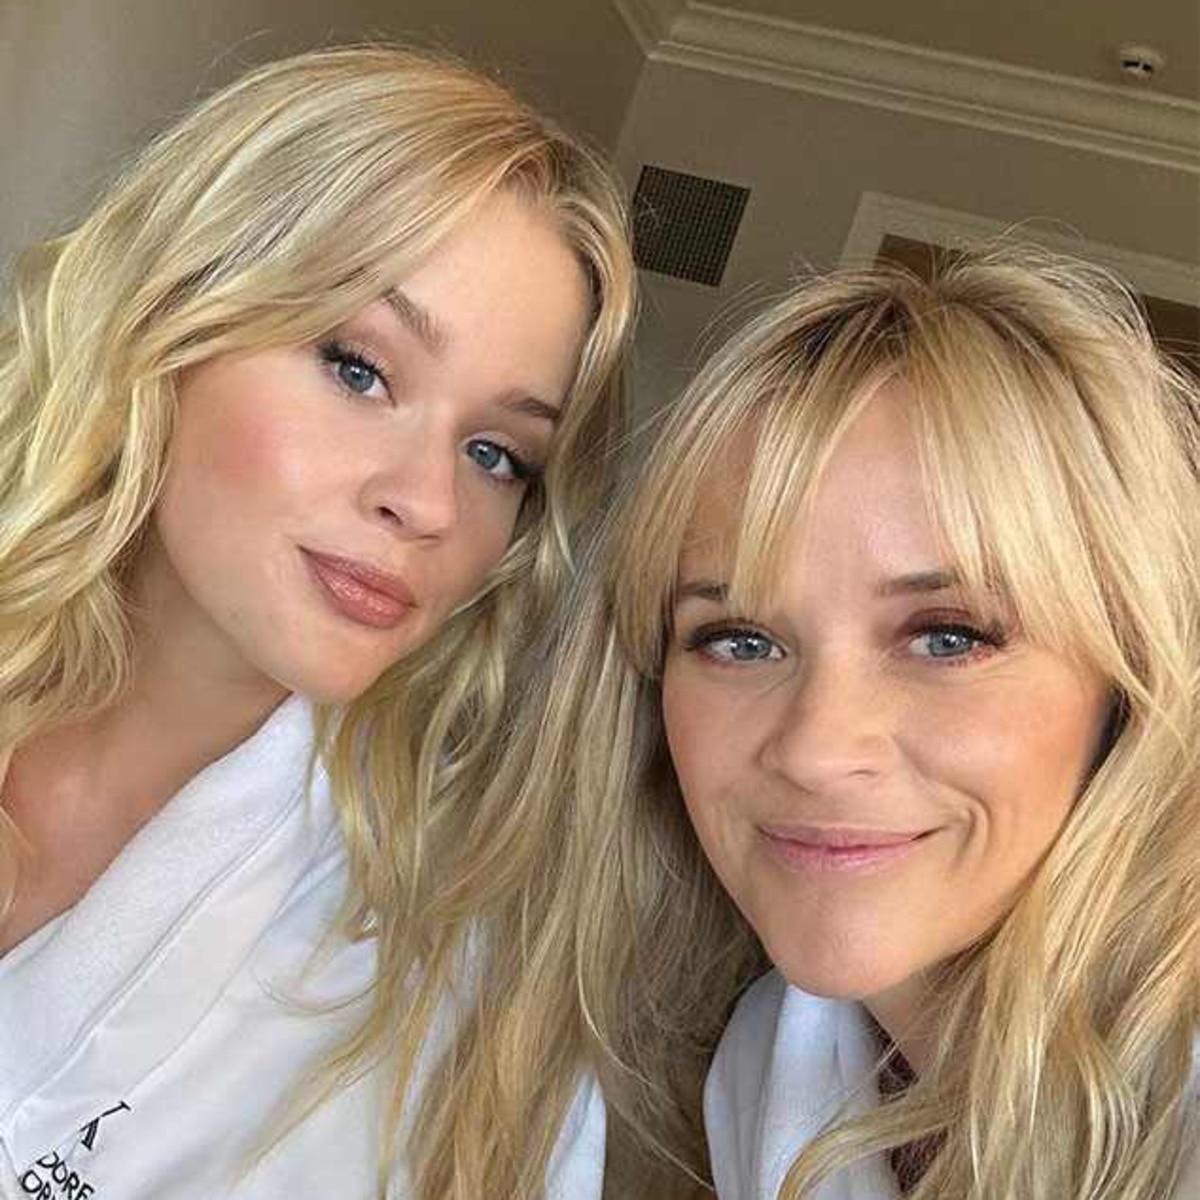 Reese Witherspoon’s Daughter Ava Phillippe Details “Intense” Anxiety